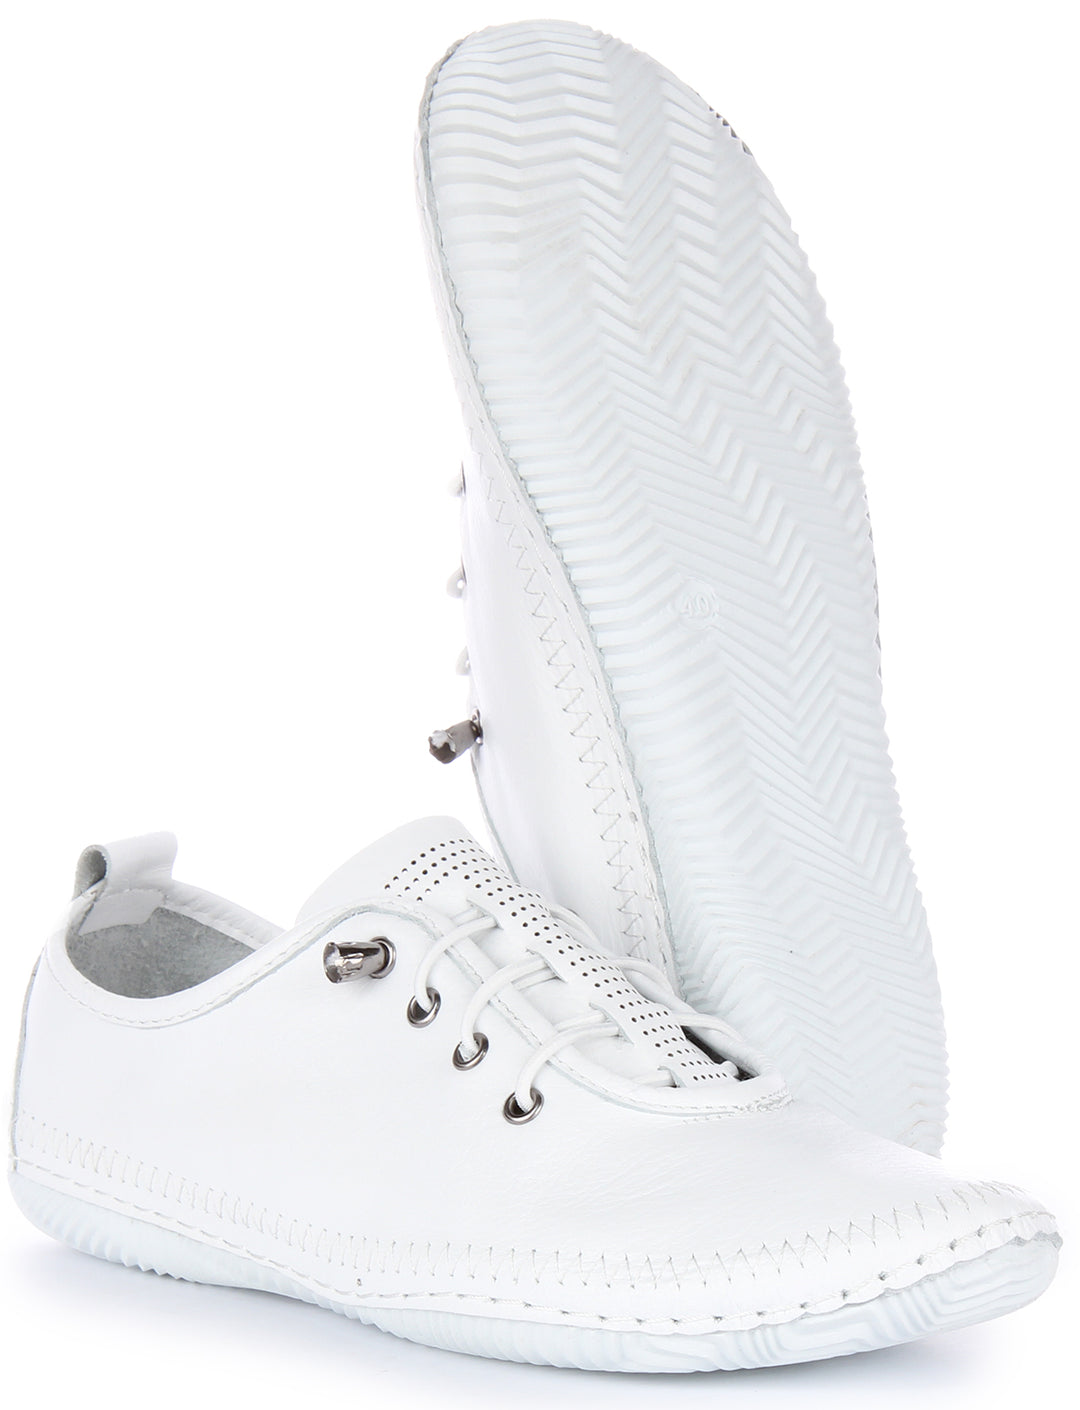 Justinreess England Lita In White For Women